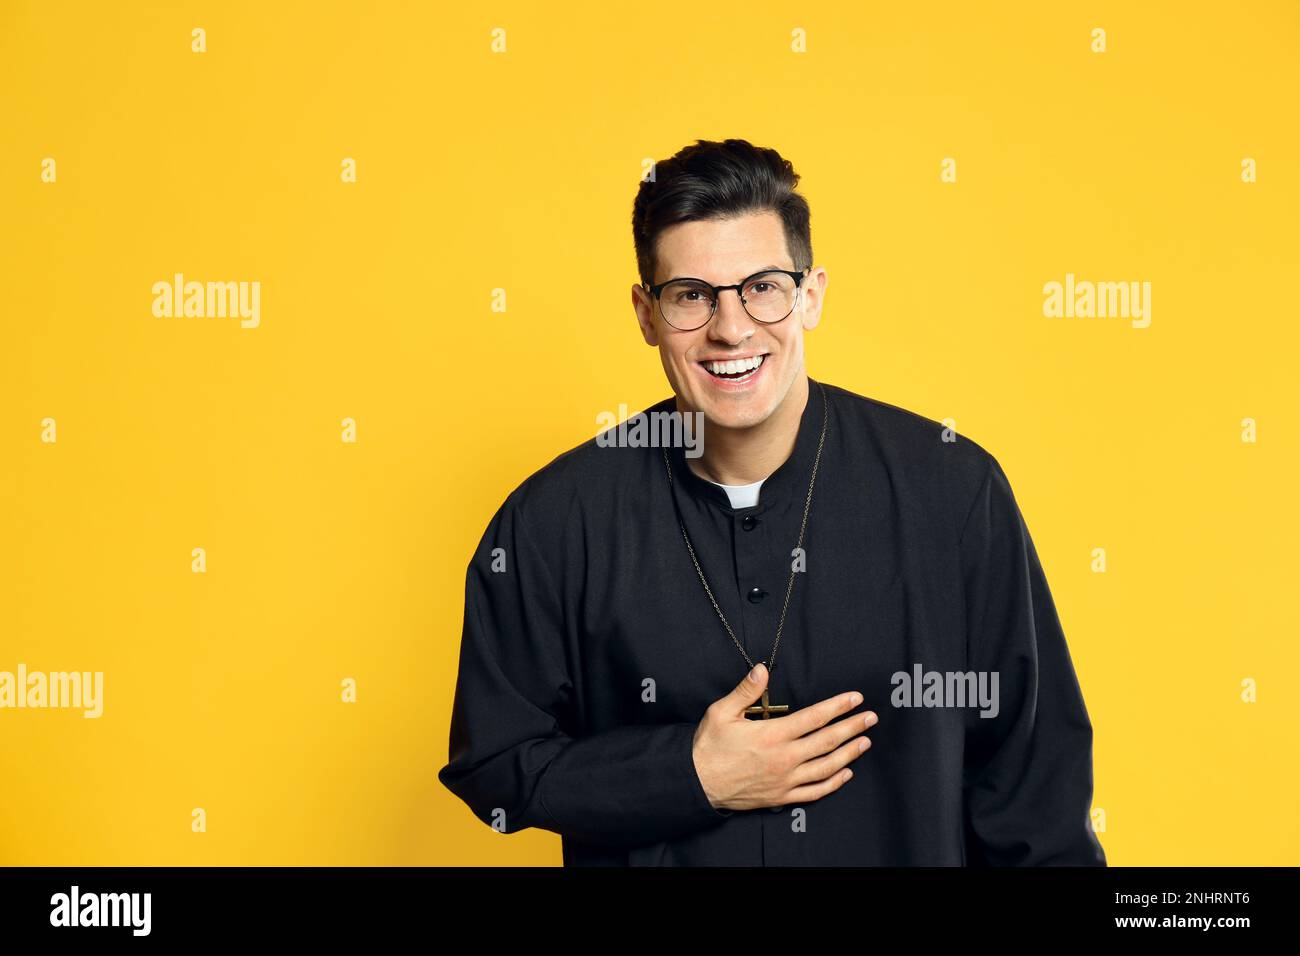 Priest in cassock with clerical collar laughing on yellow background Stock Photo